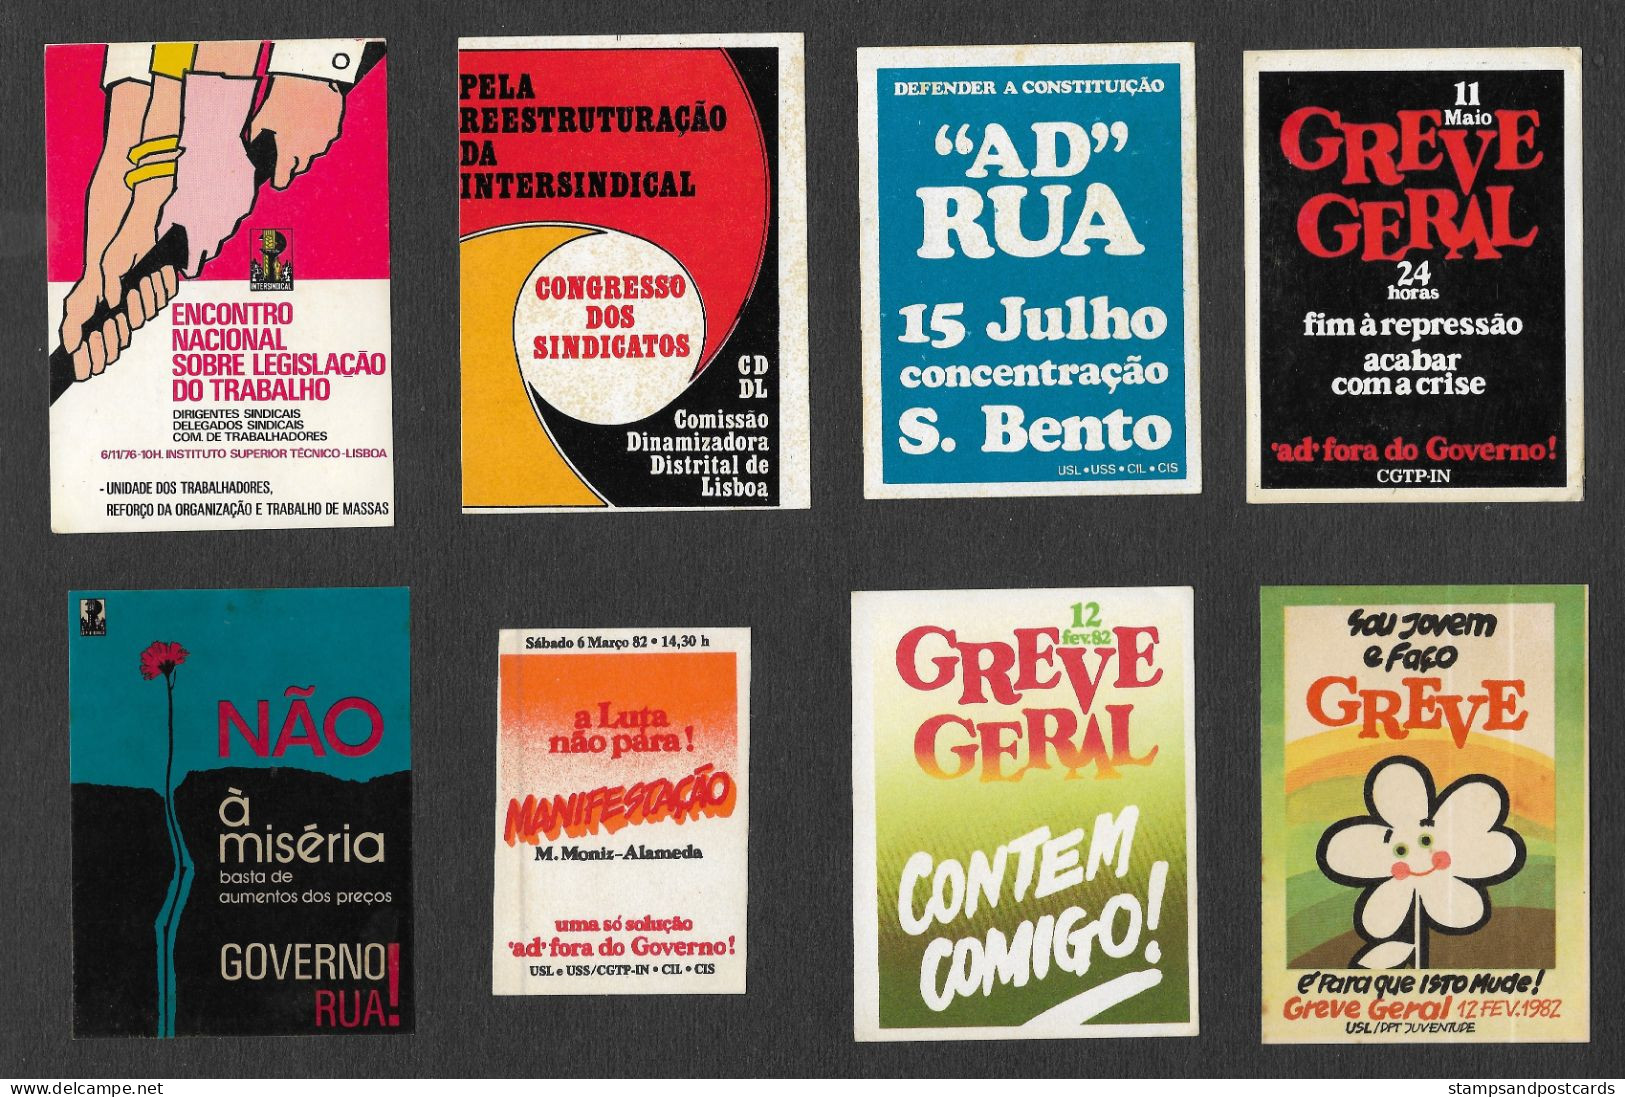 Portugal 44 Autocollant Politique 1976 - 1982 CGTP CGT Centrale Syndicale Workers Union Central 44 Political Sticker - Stickers